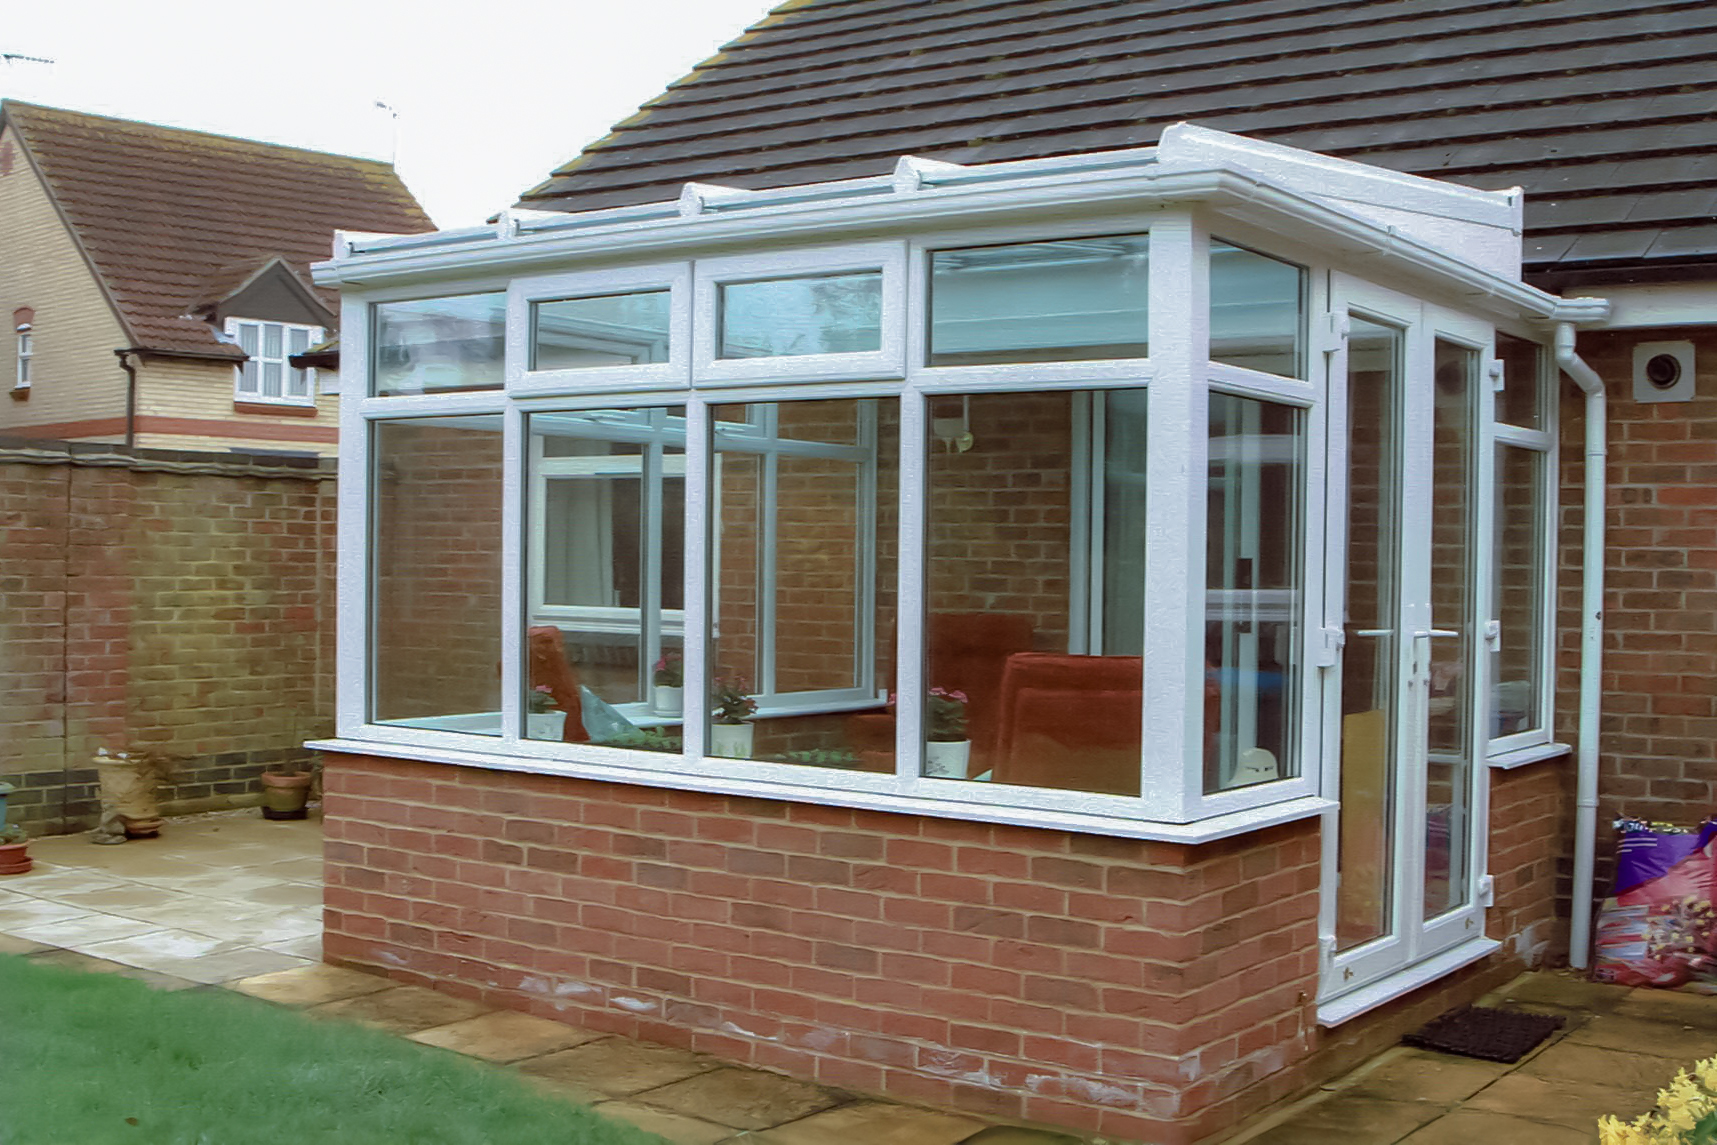 White PVCu Lean-To Conervatory with solar control glass roof sheets, French doors & Box gutter to house wall